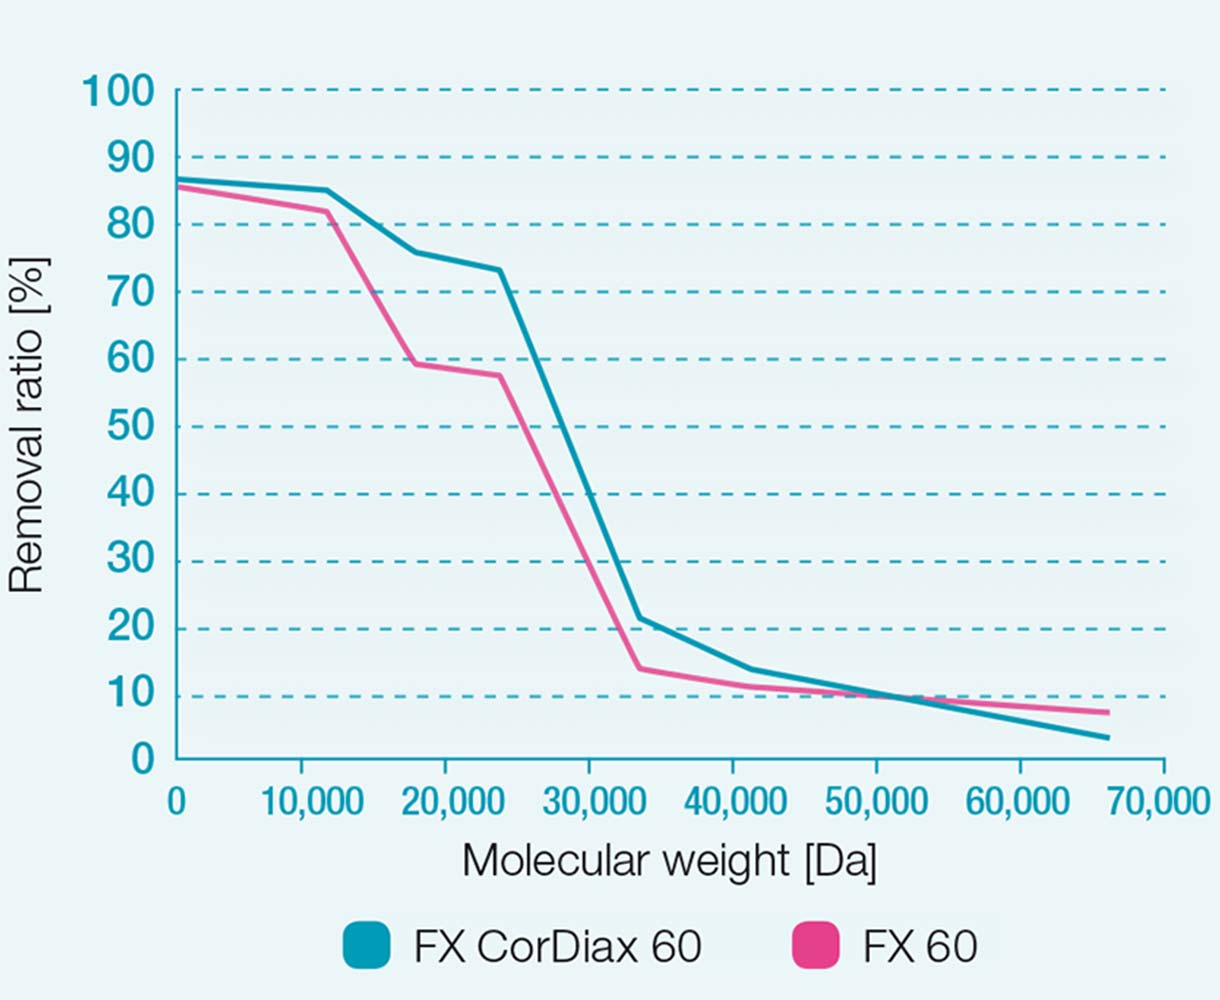 Removal ratios of FX 60 and FX CorDiax 60 dialyzers